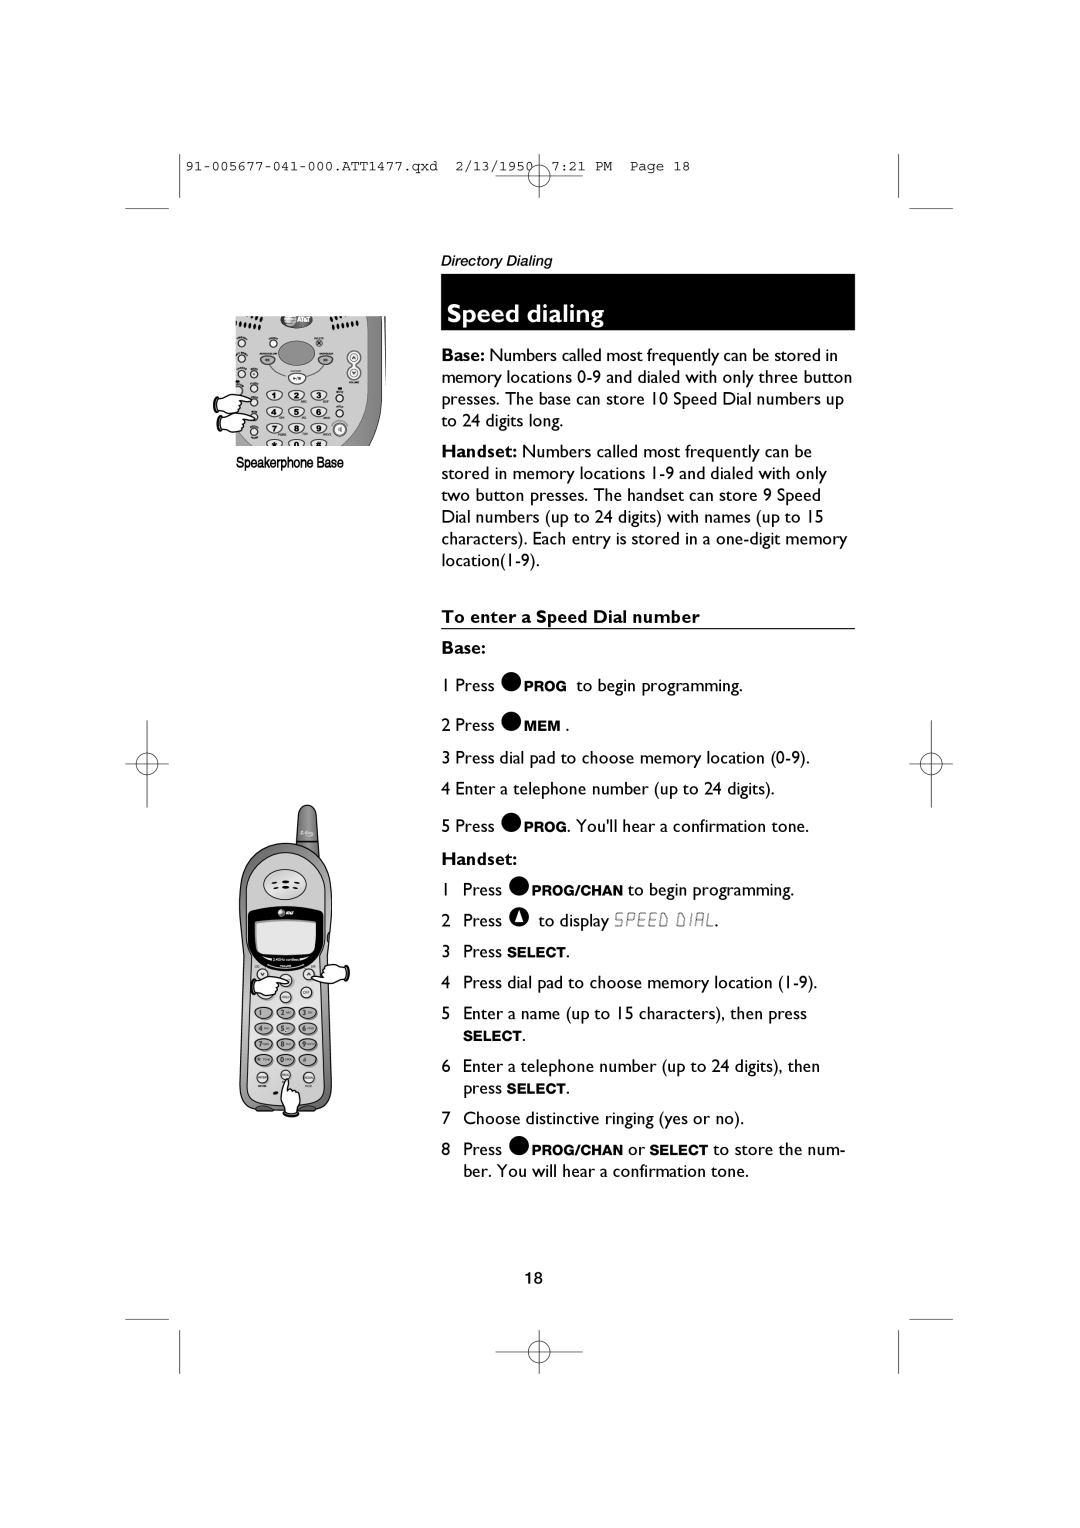 AT&T 1177 user manual Speed dialing, To enter a Speed Dial number Base, Handset 